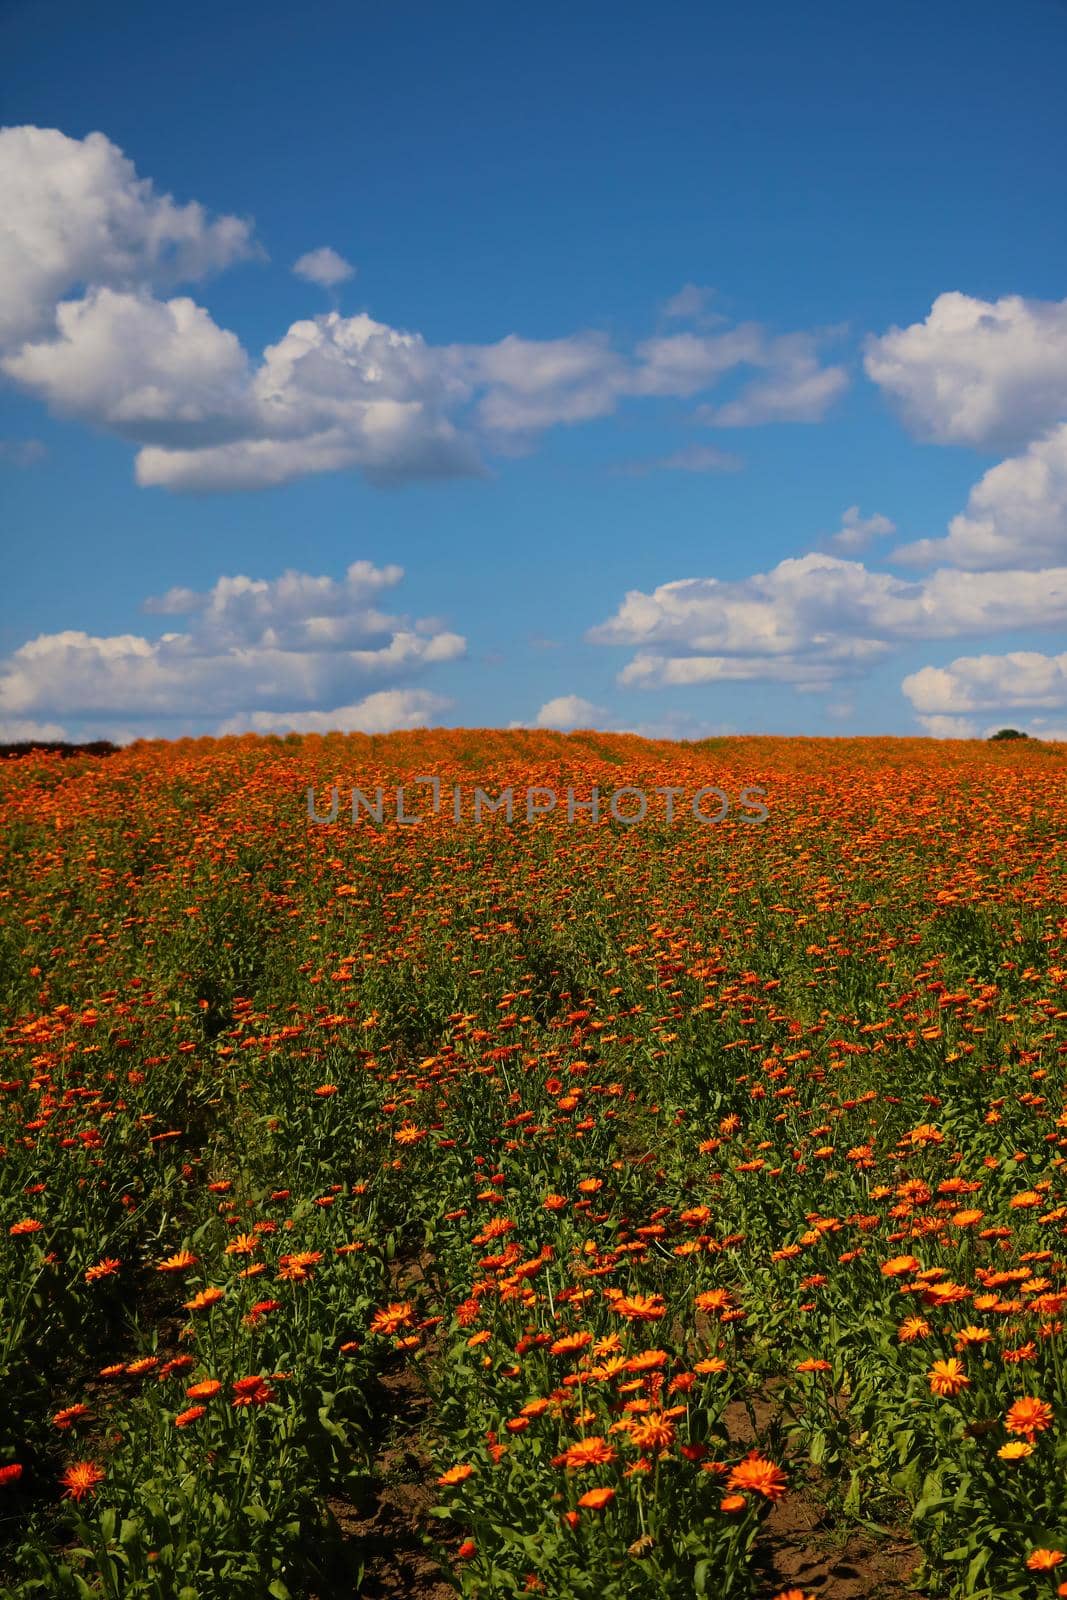 Blooming field of calendula. A useful plant used in medicine